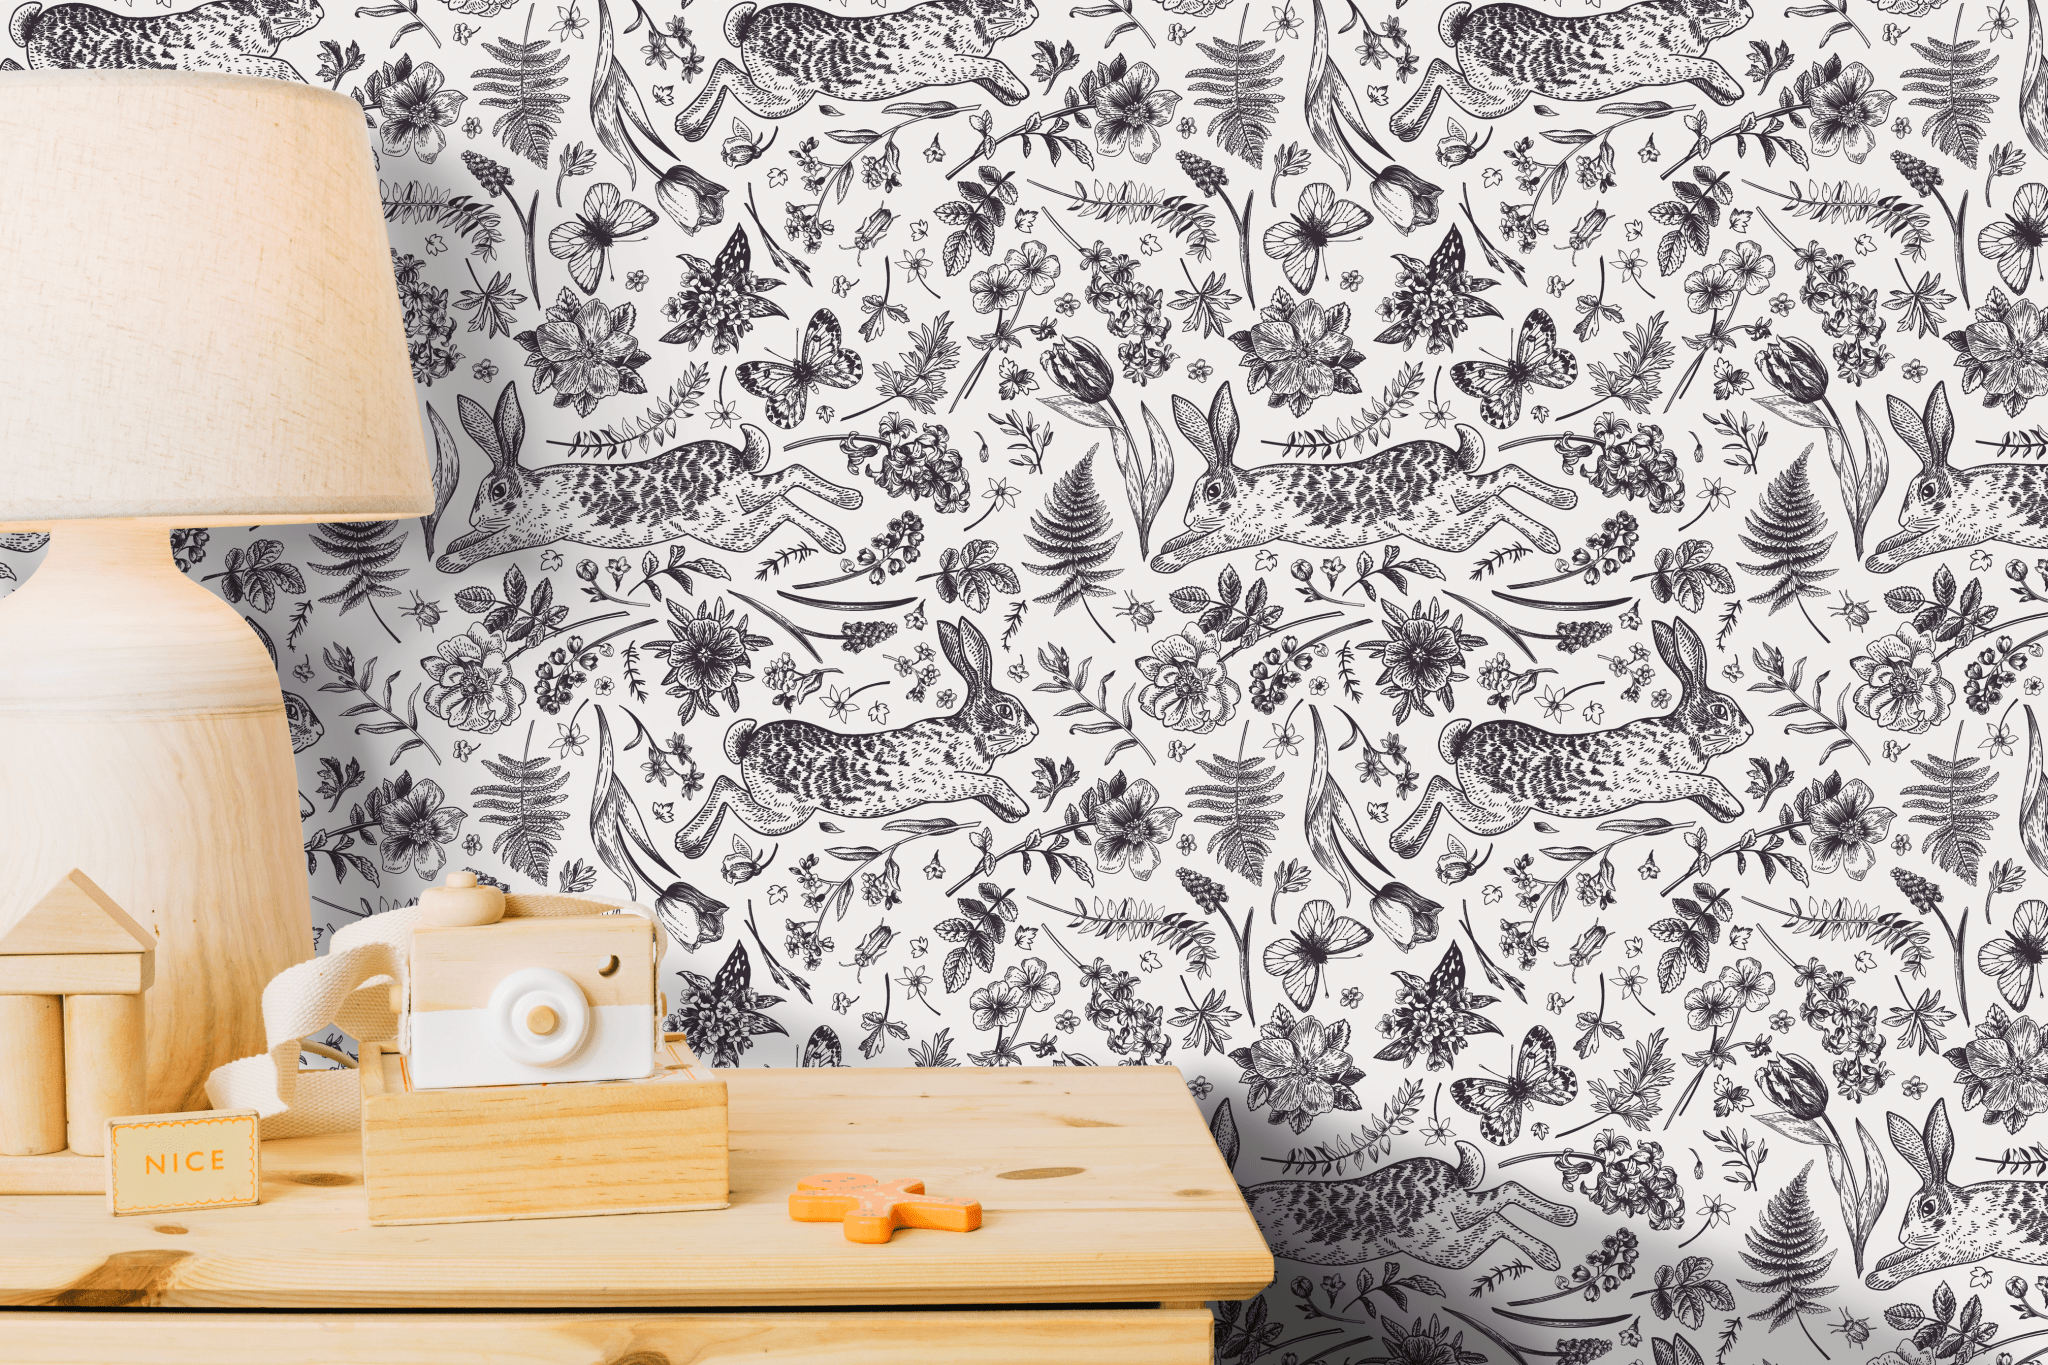 A close-up view of peel and stick wallpaper featuring an intricate hand-drawn style pattern of rabbits, tulips, butterflies, and ferns in a monochromatic black and white color scheme on a wall behind a wooden table with a lamp and toy camera